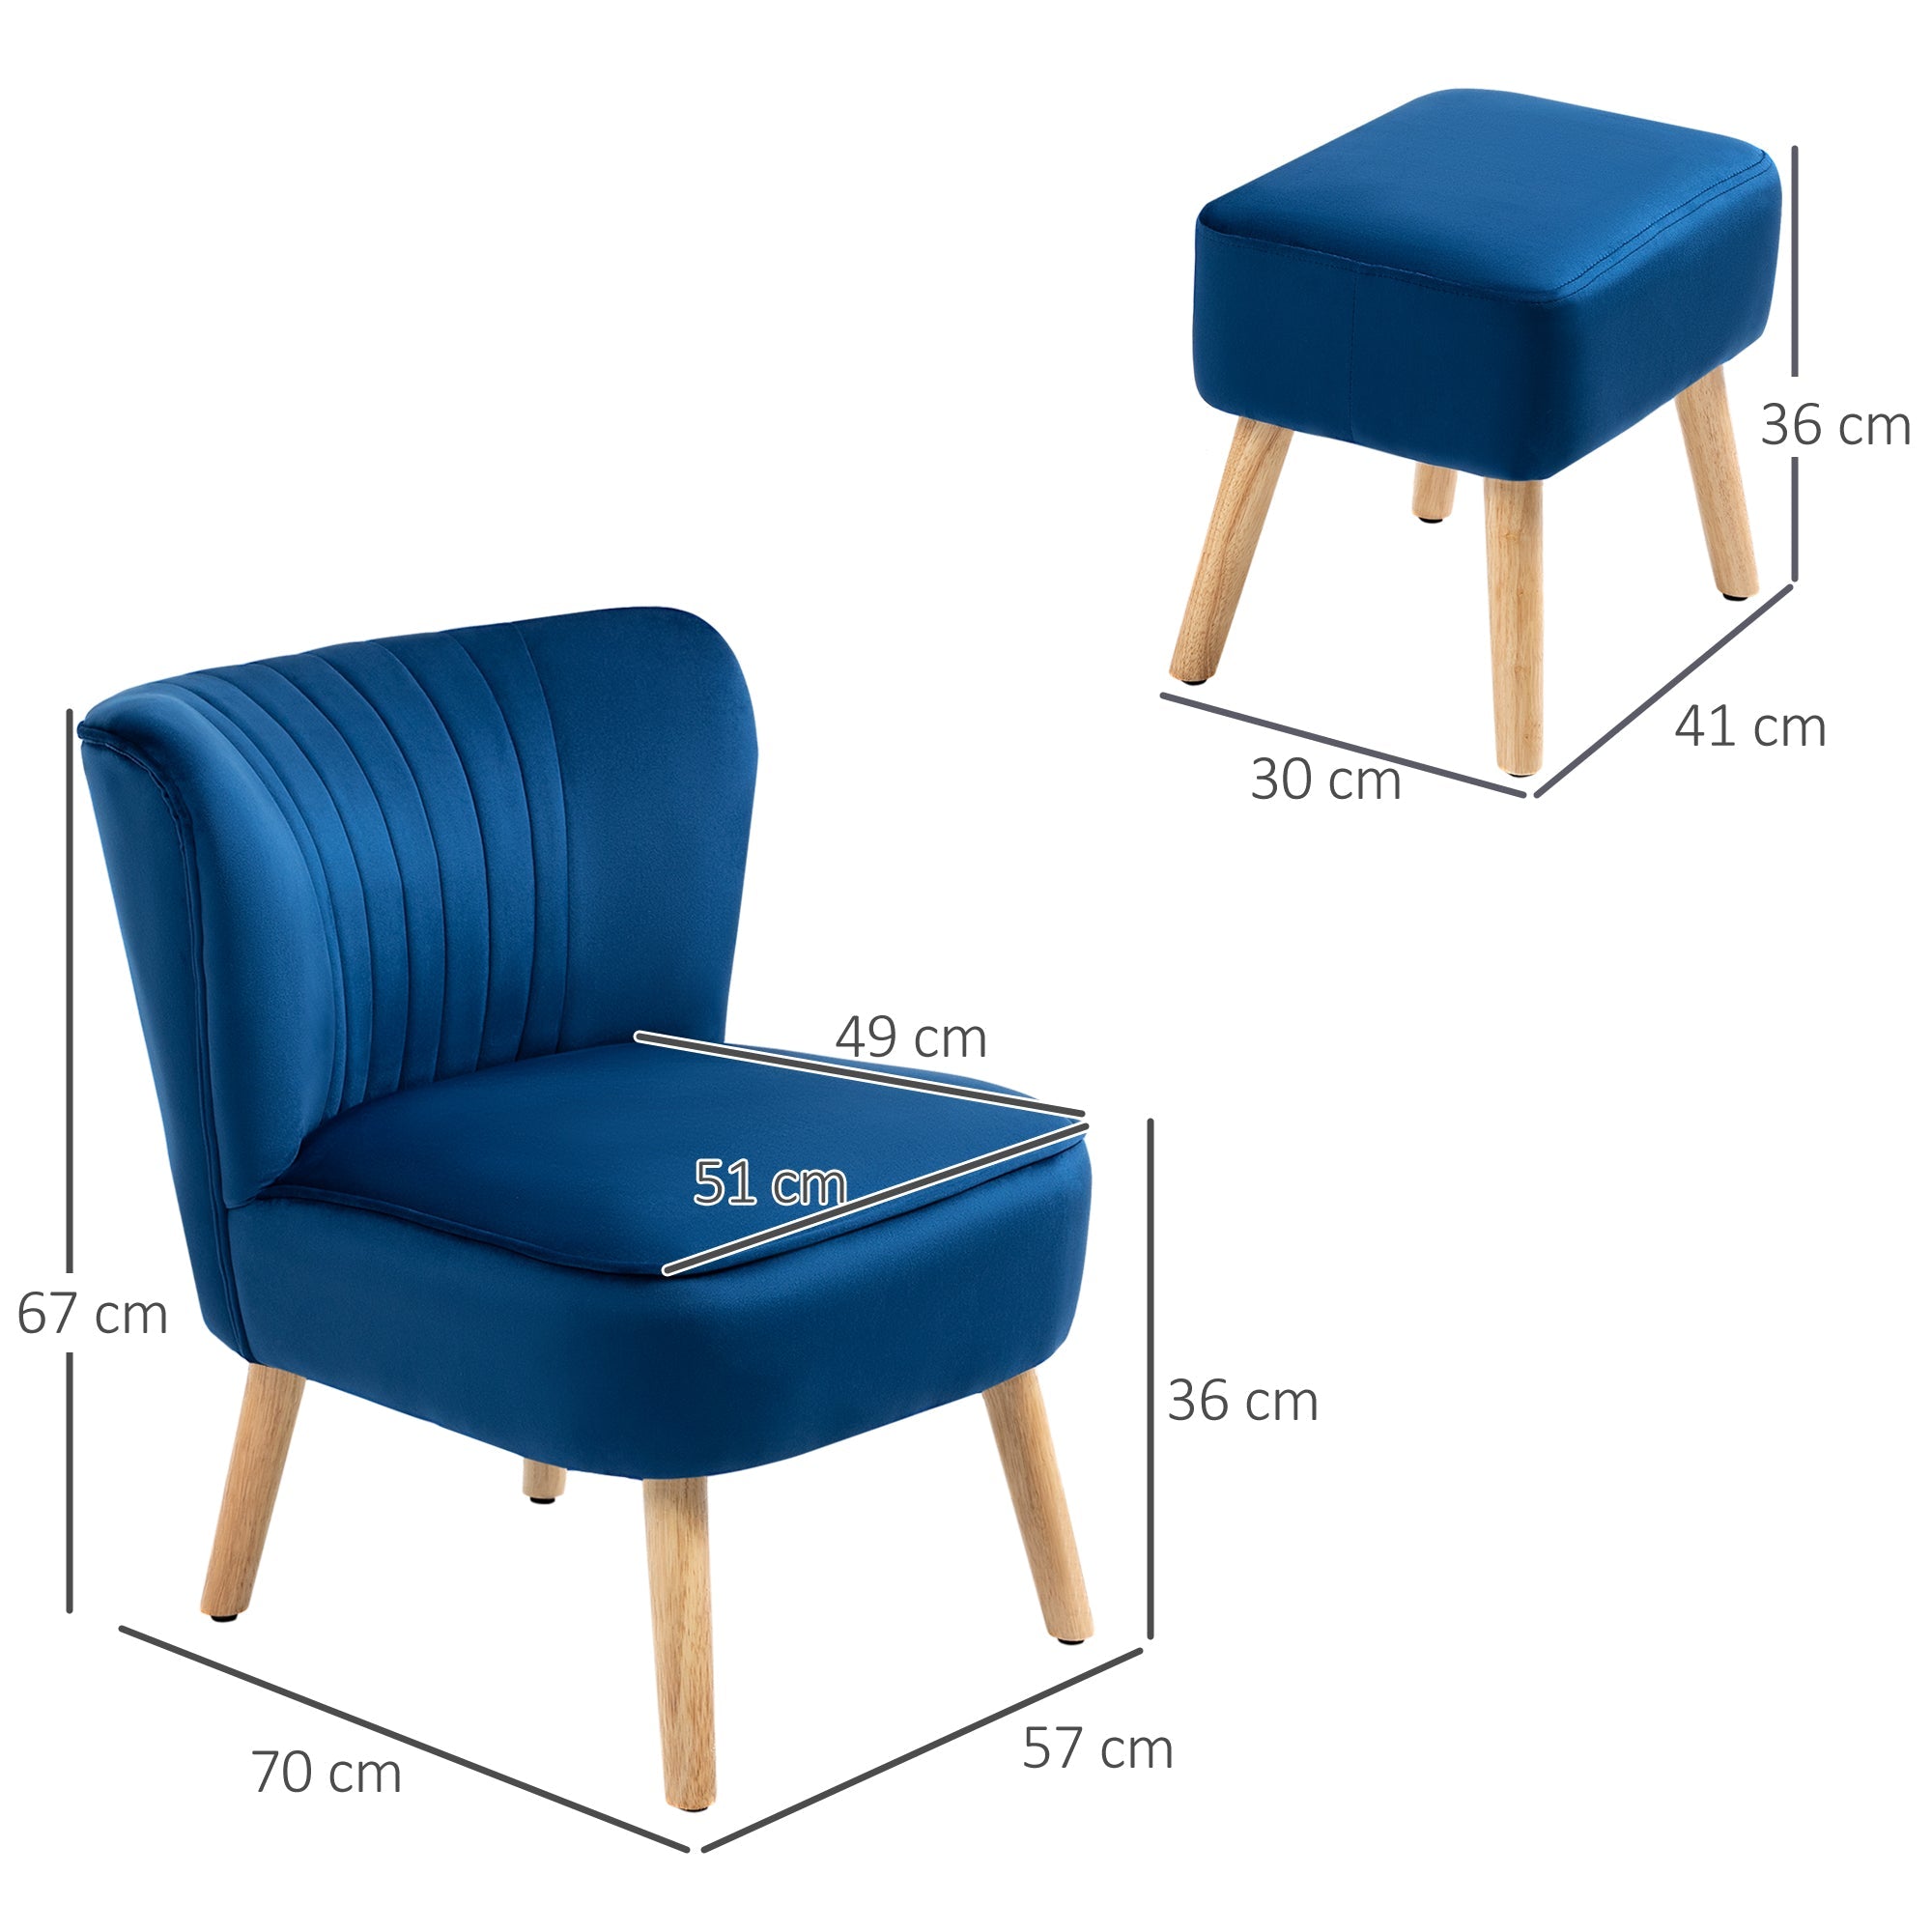 Velvet Accent Chair Occasional Tub Seat Padding Curved Back w/ Ottoman Wood Frame Legs Home Furniture, Dark Blue-2